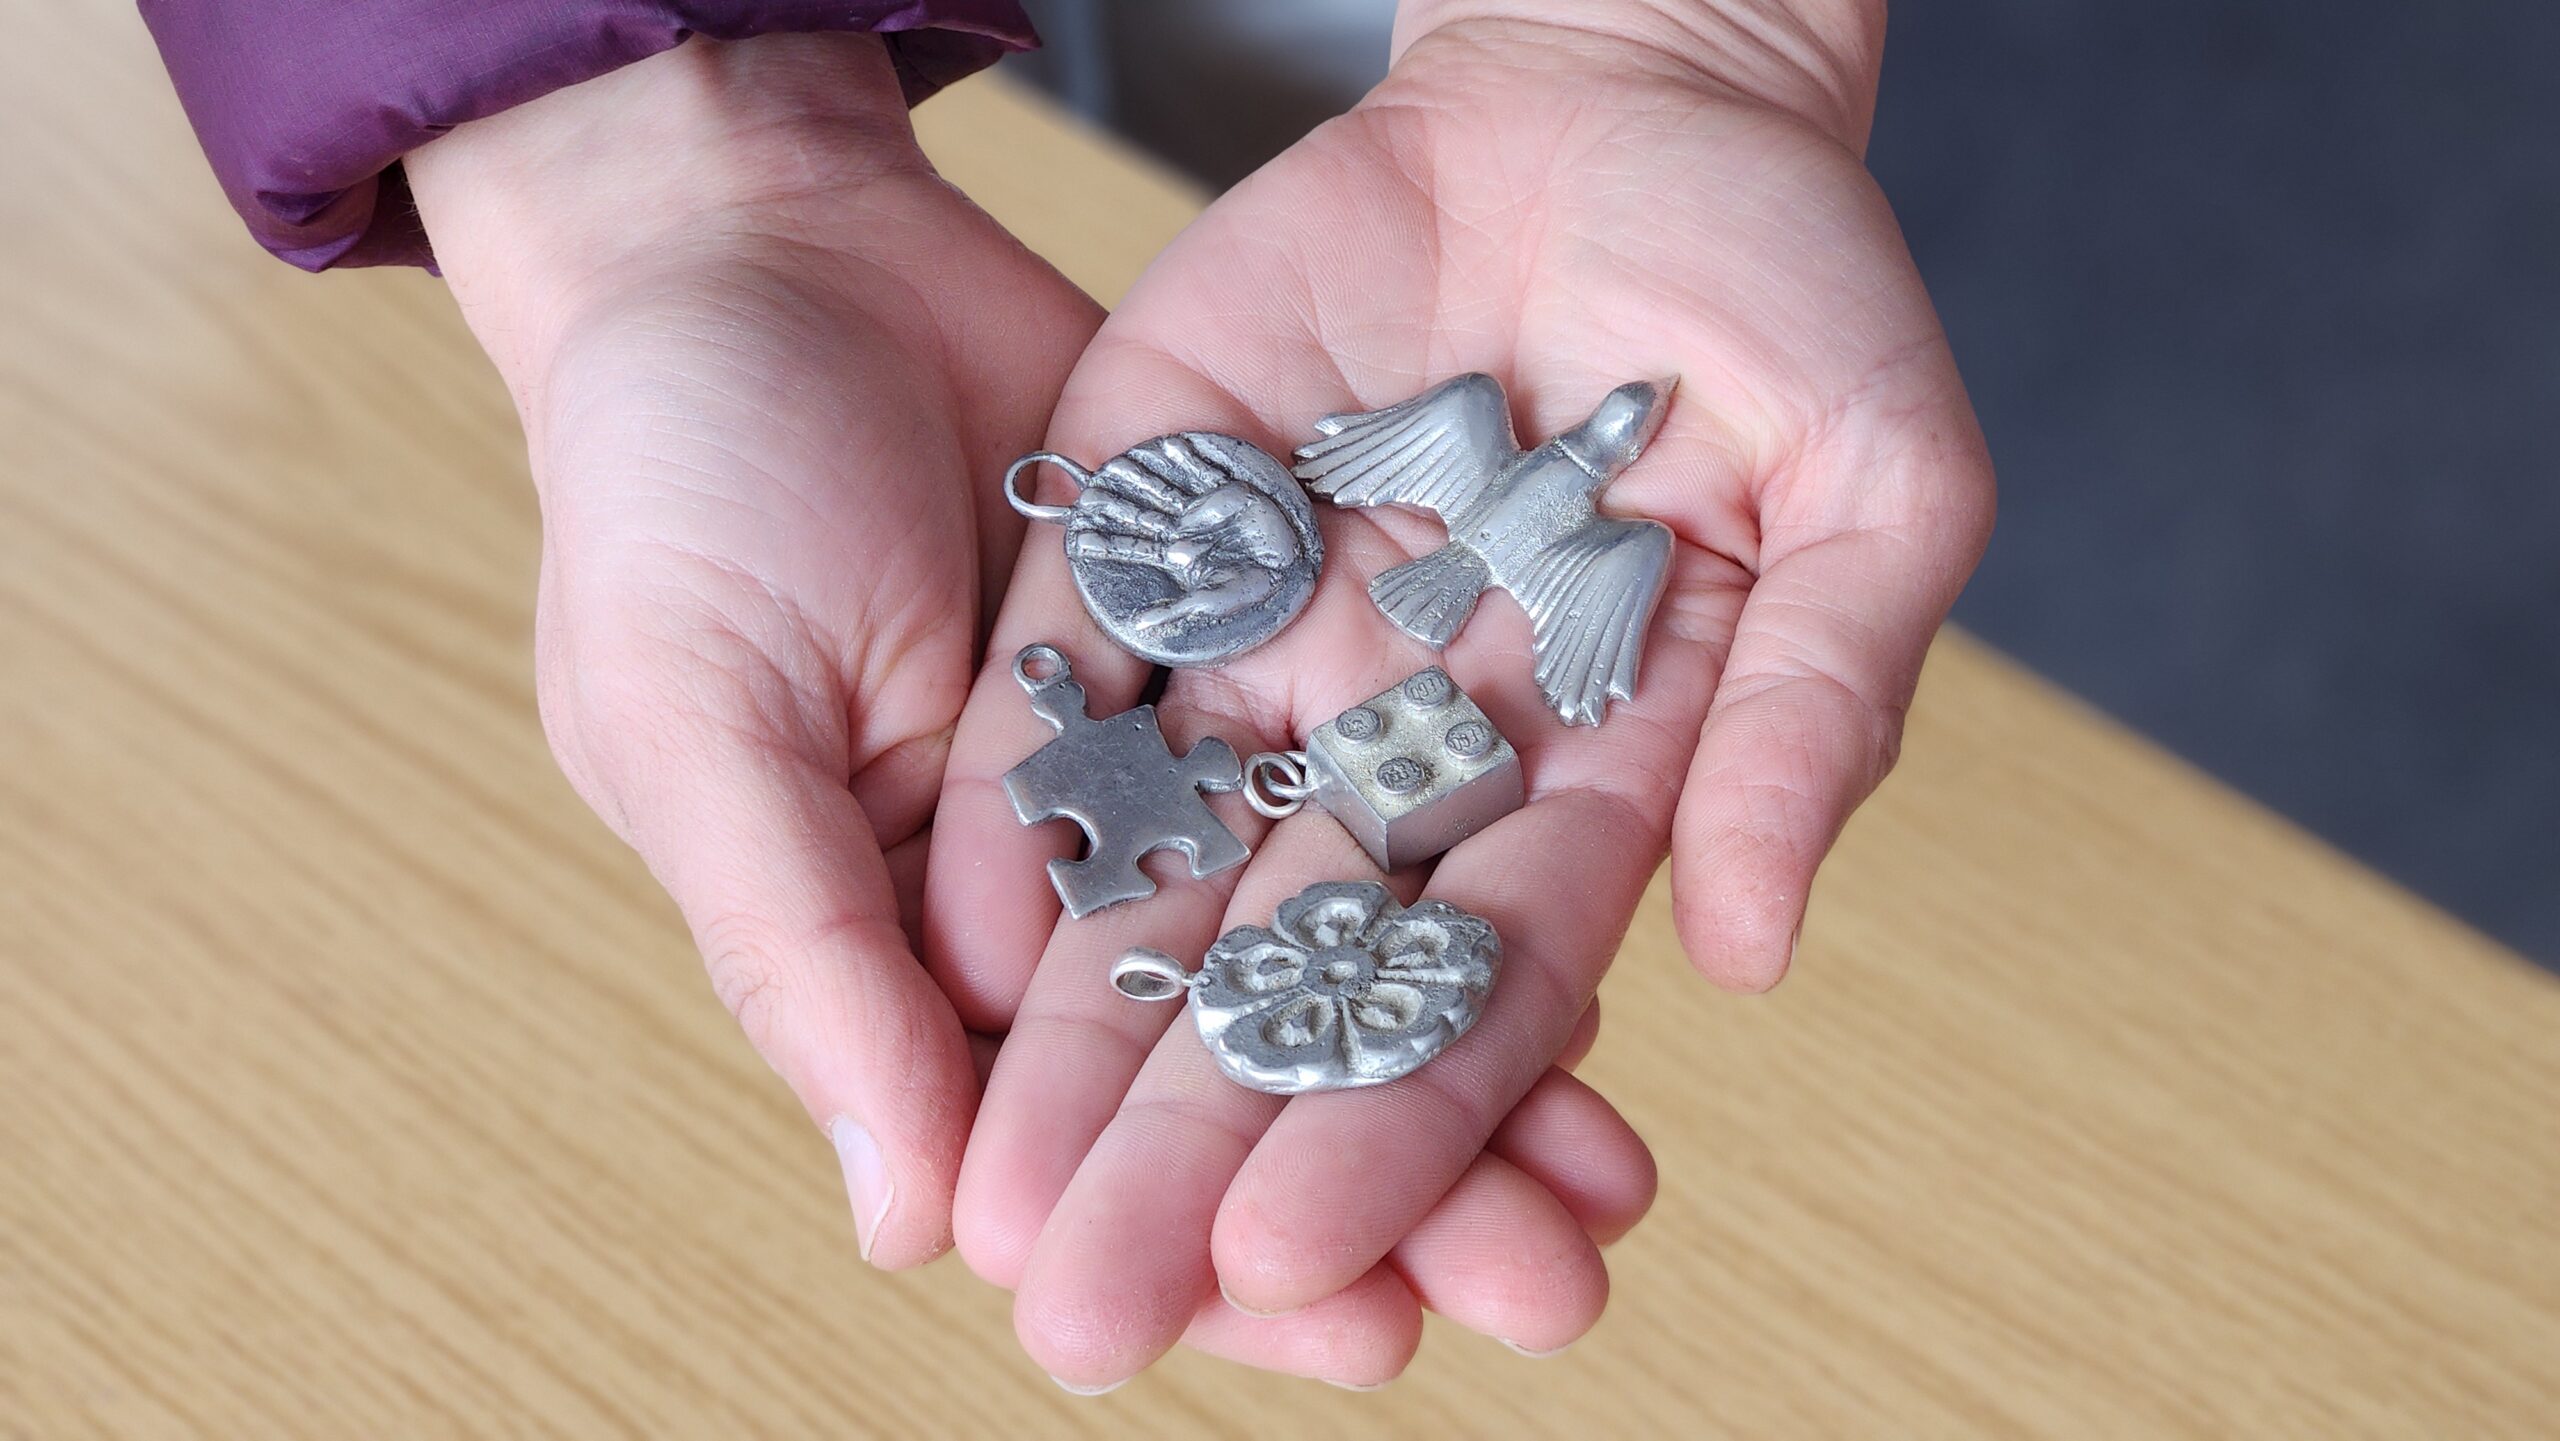 Photo of a person's hands holding a selection of small metal objects including a coin, a bird and a Lego brick